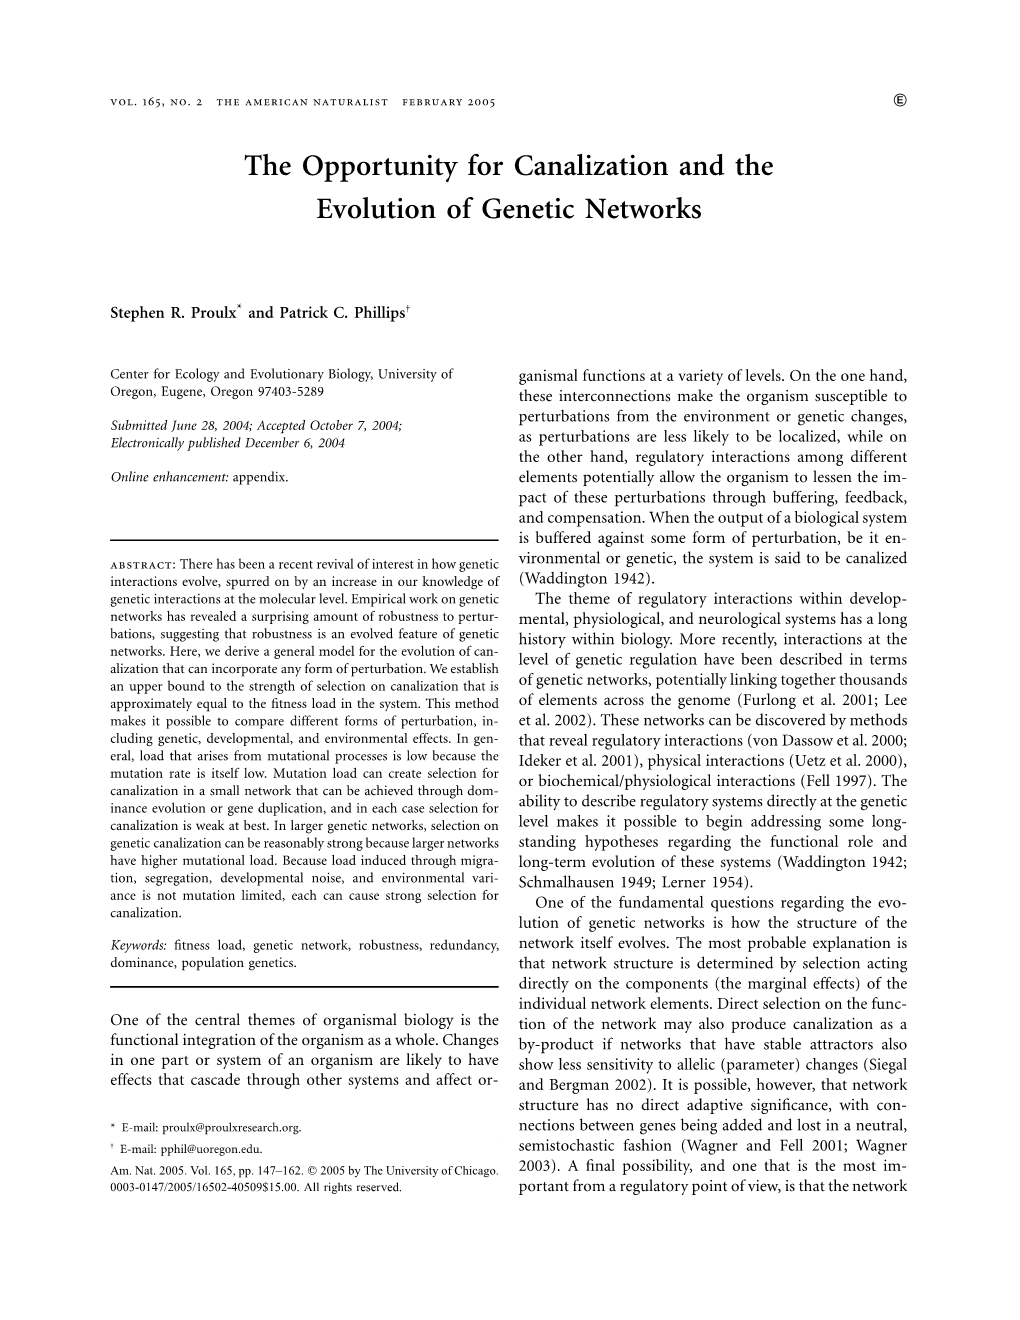 The Opportunity for Canalization and the Evolution of Genetic Networks